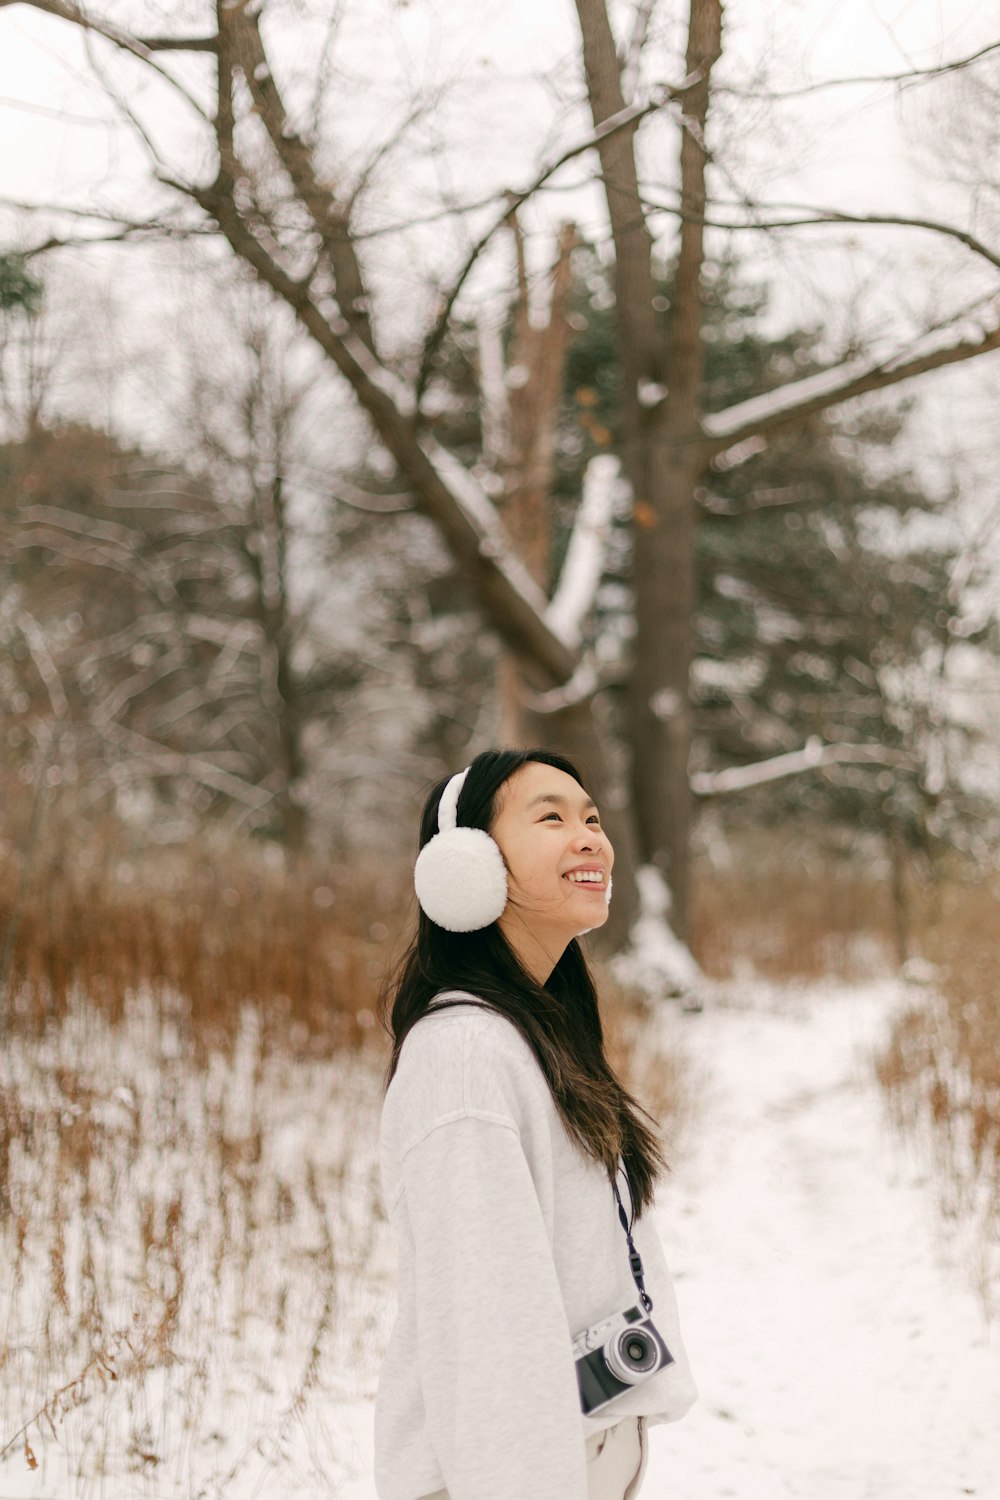 a woman standing in the snow wearing headphones